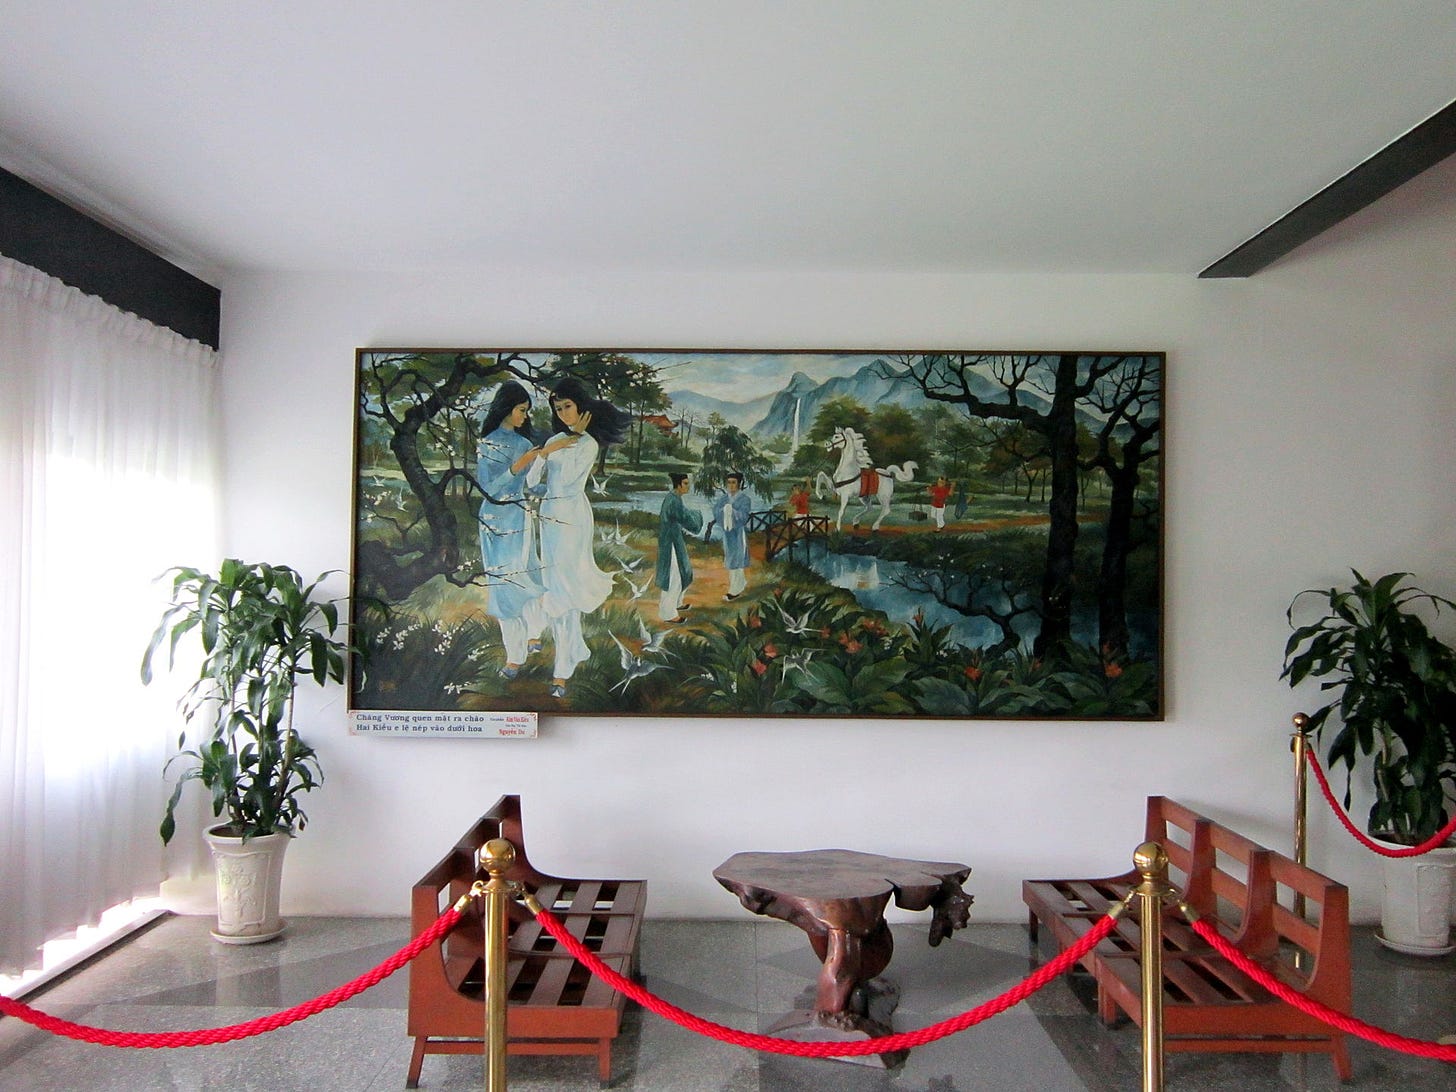 A painting depicting a scene from The Tale of Kieu at the Independence Palace.